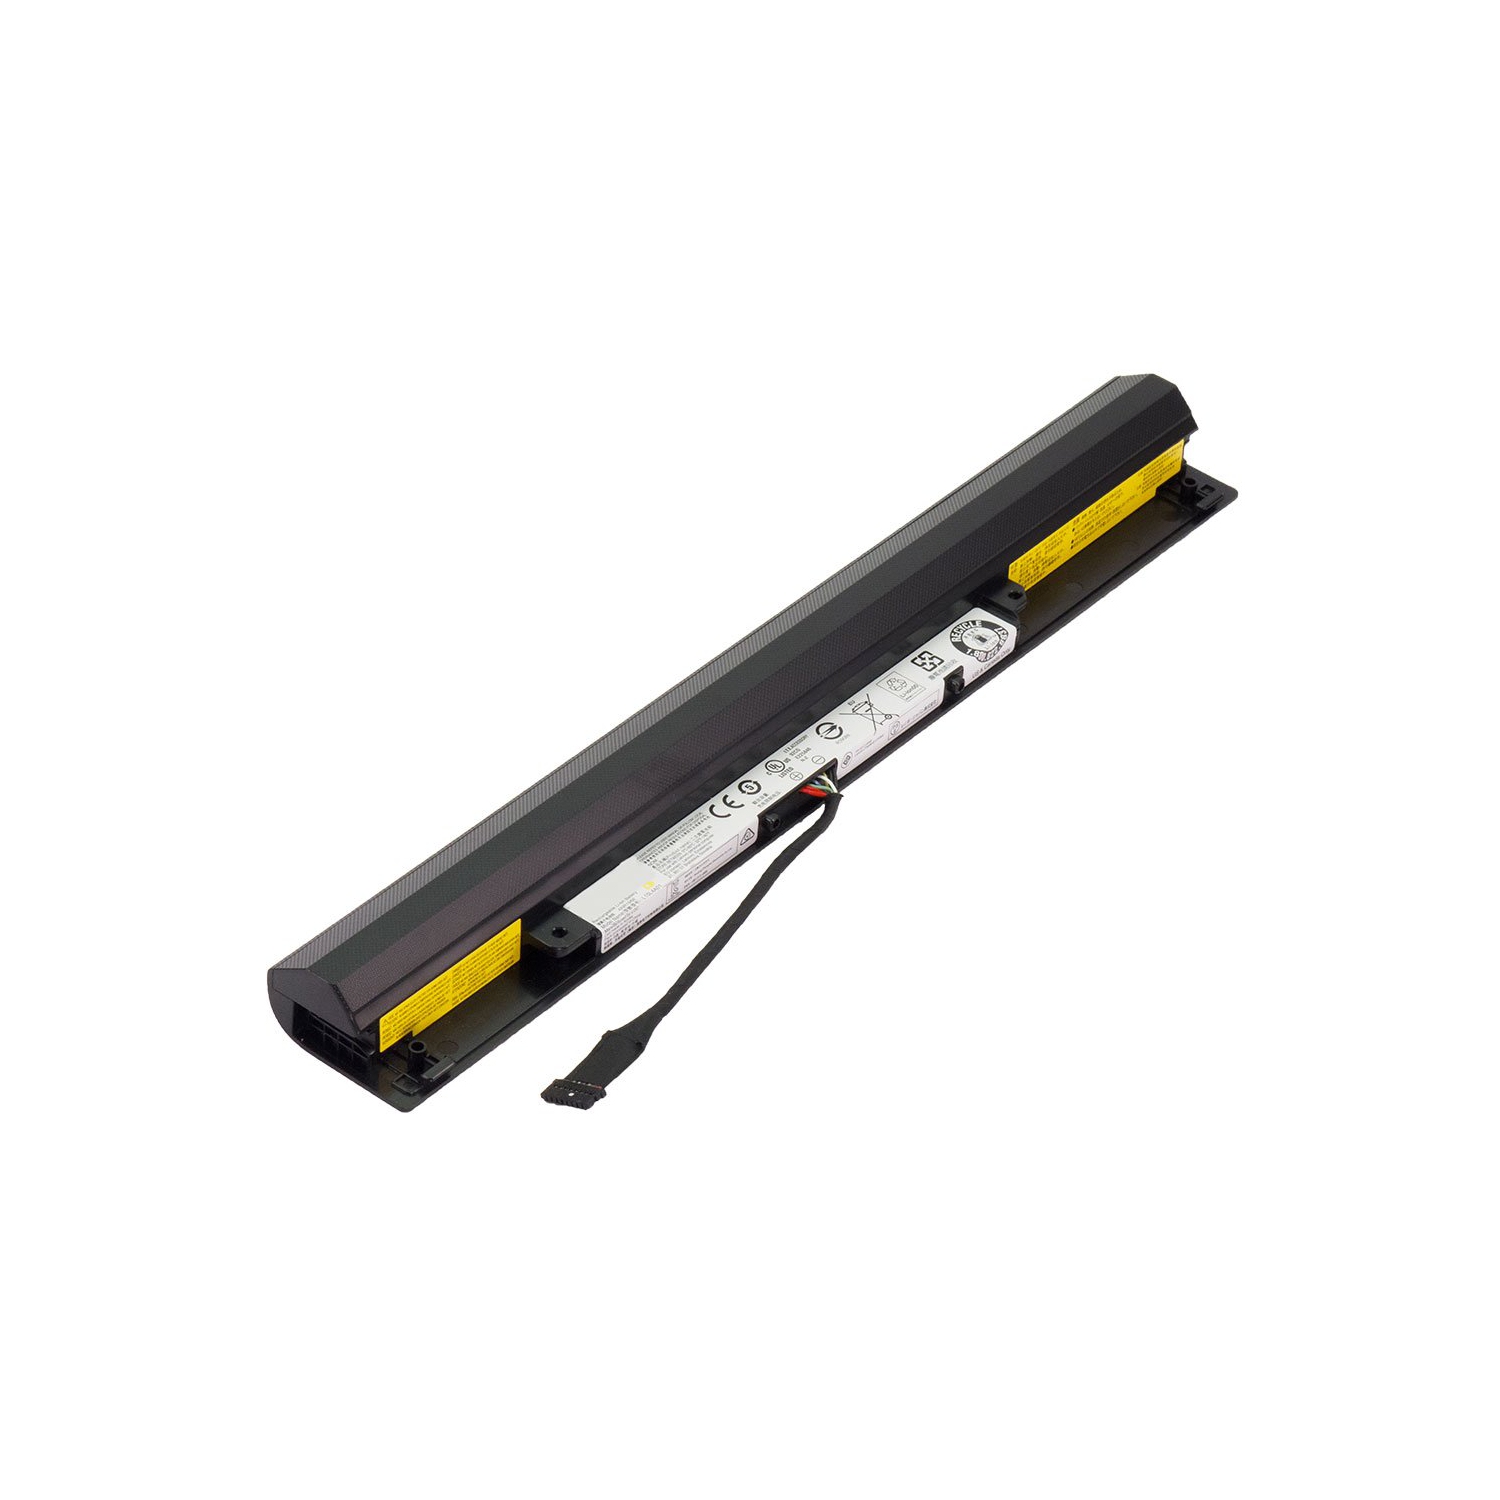 Laptop Battery Replacement for Lenovo IdeaPad 100-15IBD 80QQ00GCGE, 41NR19/65, L15L4A01